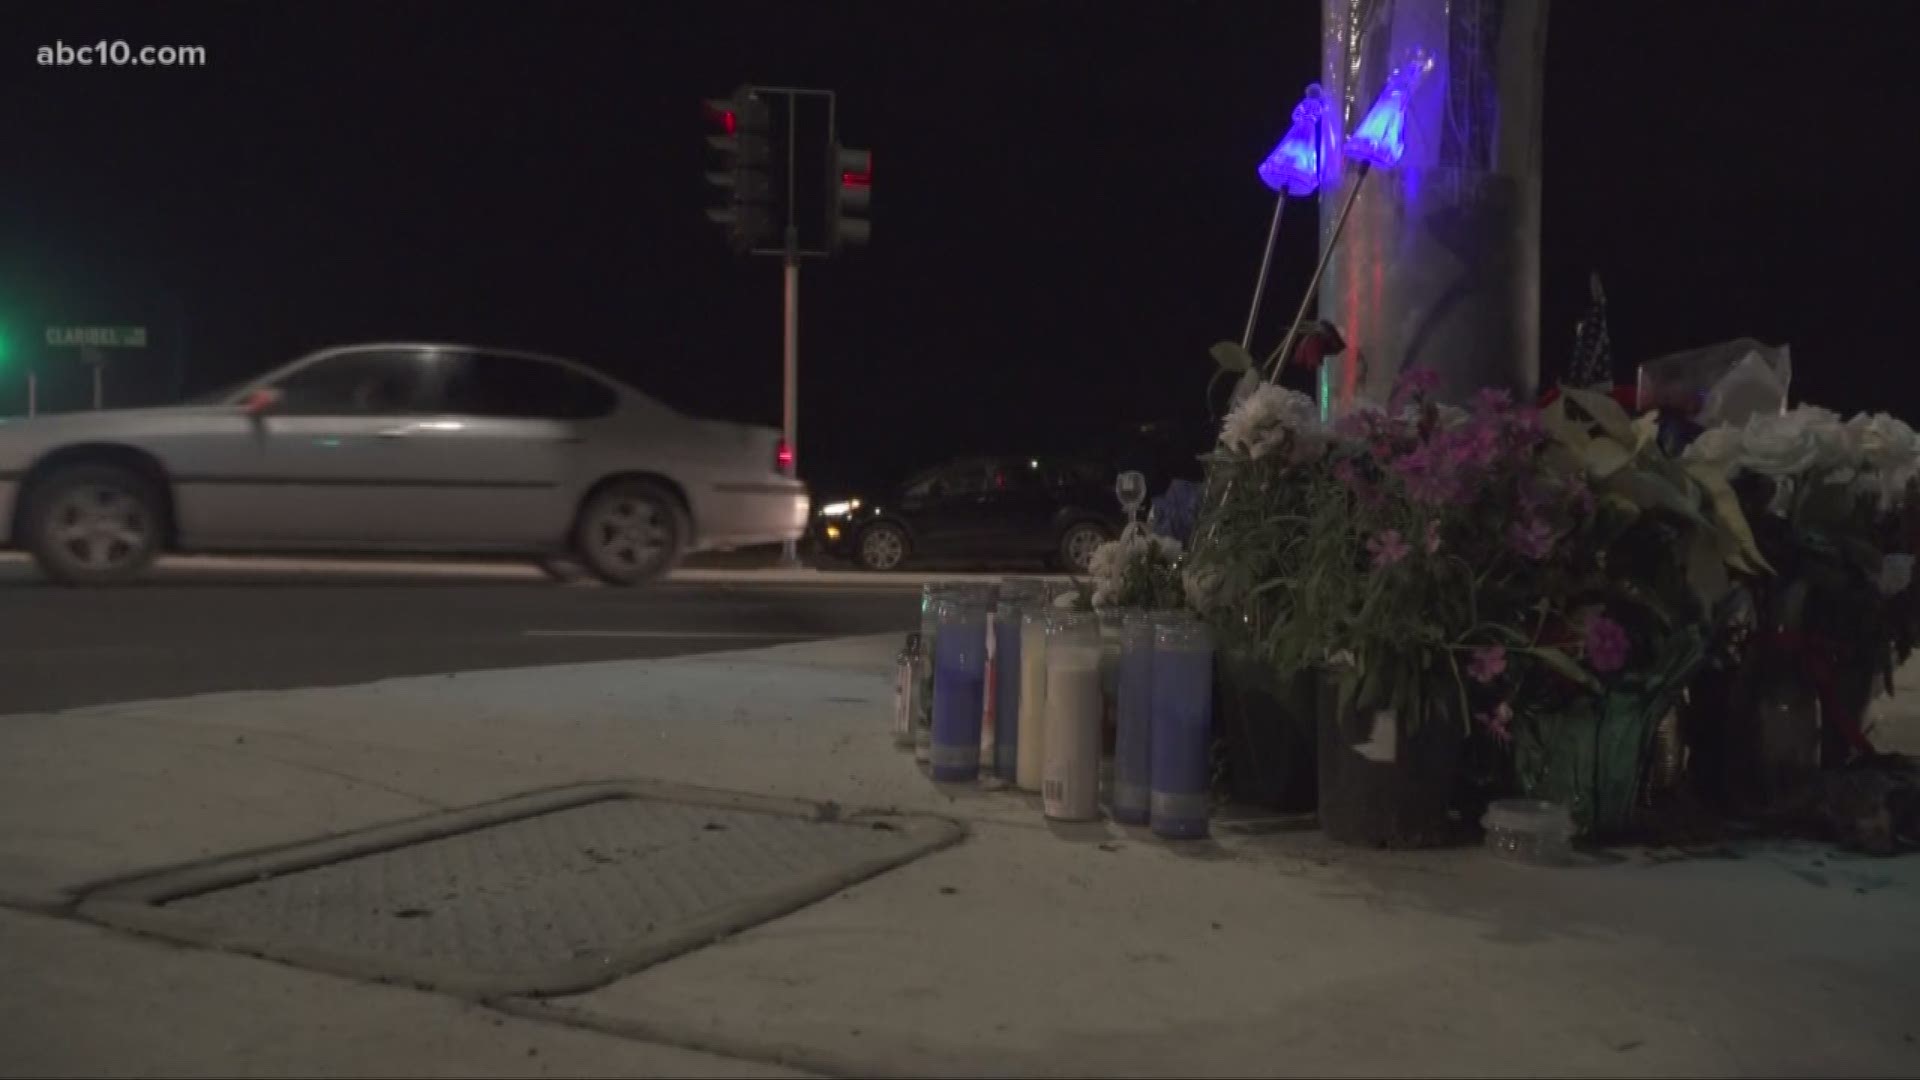 Community members are saying goodbye ahead of Deputy Antonio "Tony" Hinostroza's funeral. A makeshift memorial is set up at the intersection of Terminal Avenue and Claribel Road in Riverbank, filled with more than 20 candles and flowers. It's the spot whe